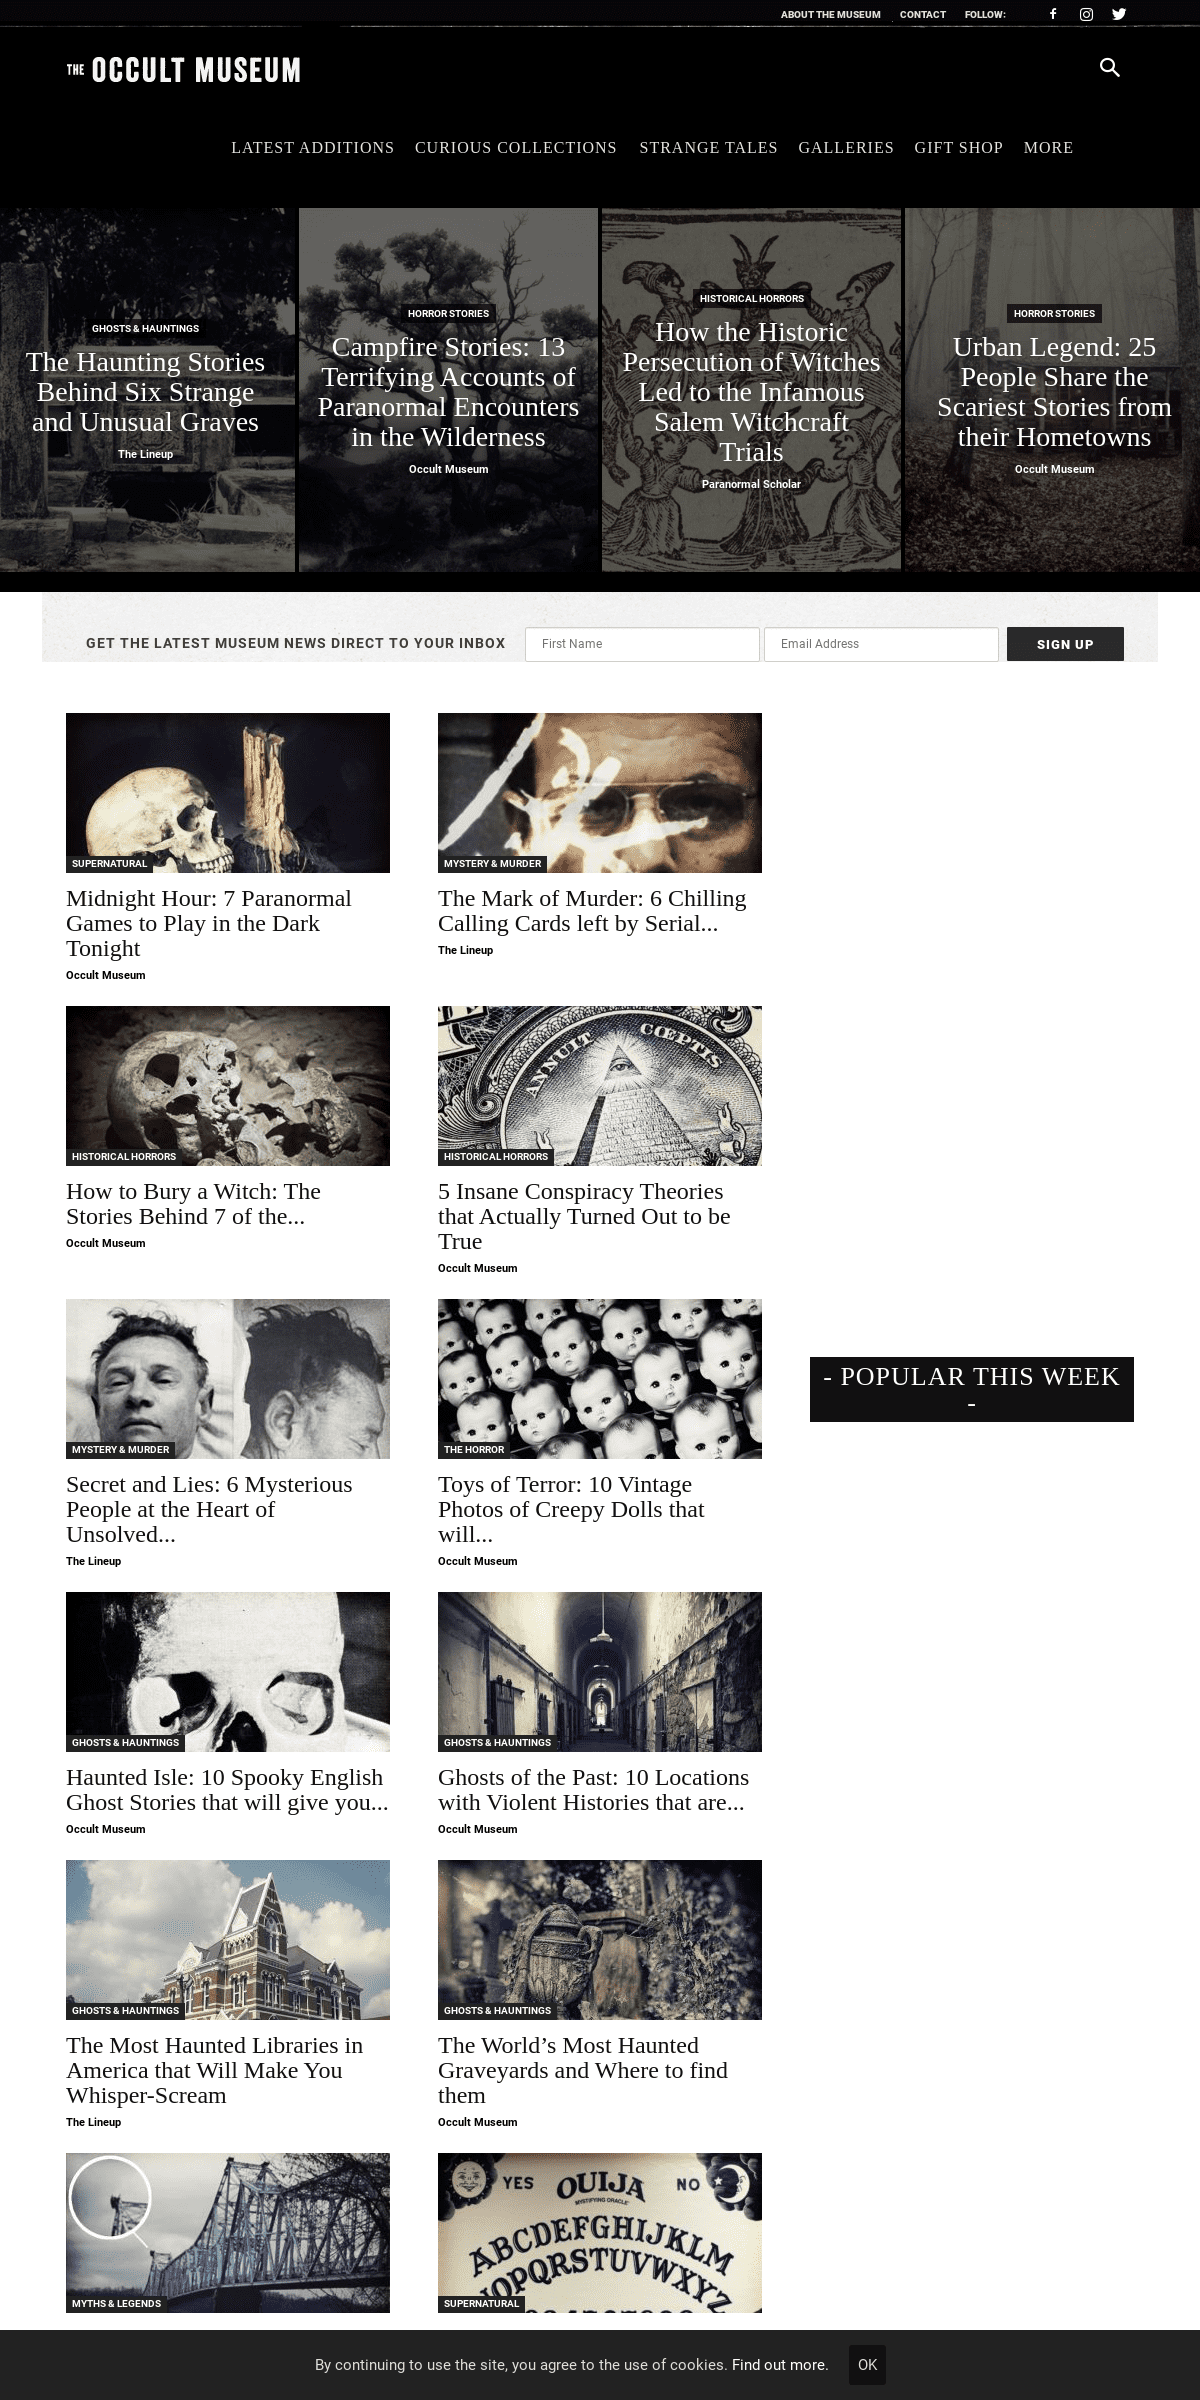 A complete backup of theoccultmuseum.com